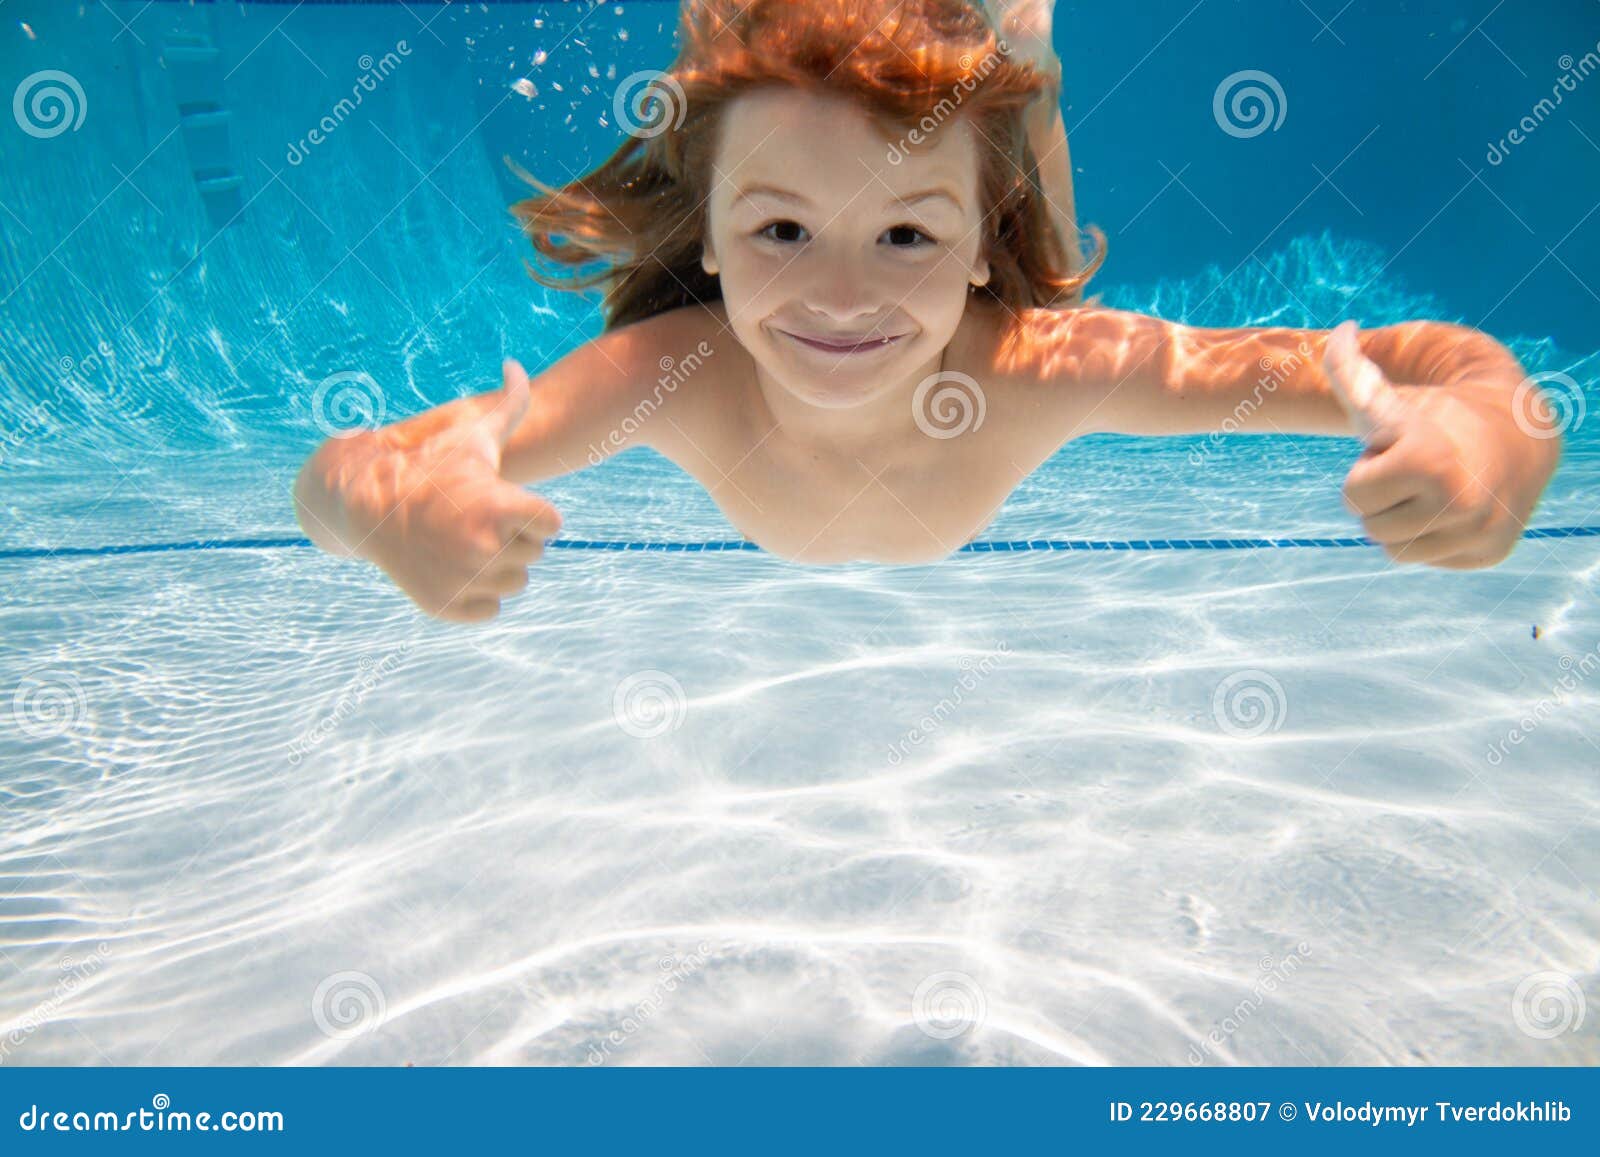 Kid in the Water Swimming Underwater and Smiling. Child Swim Under ...